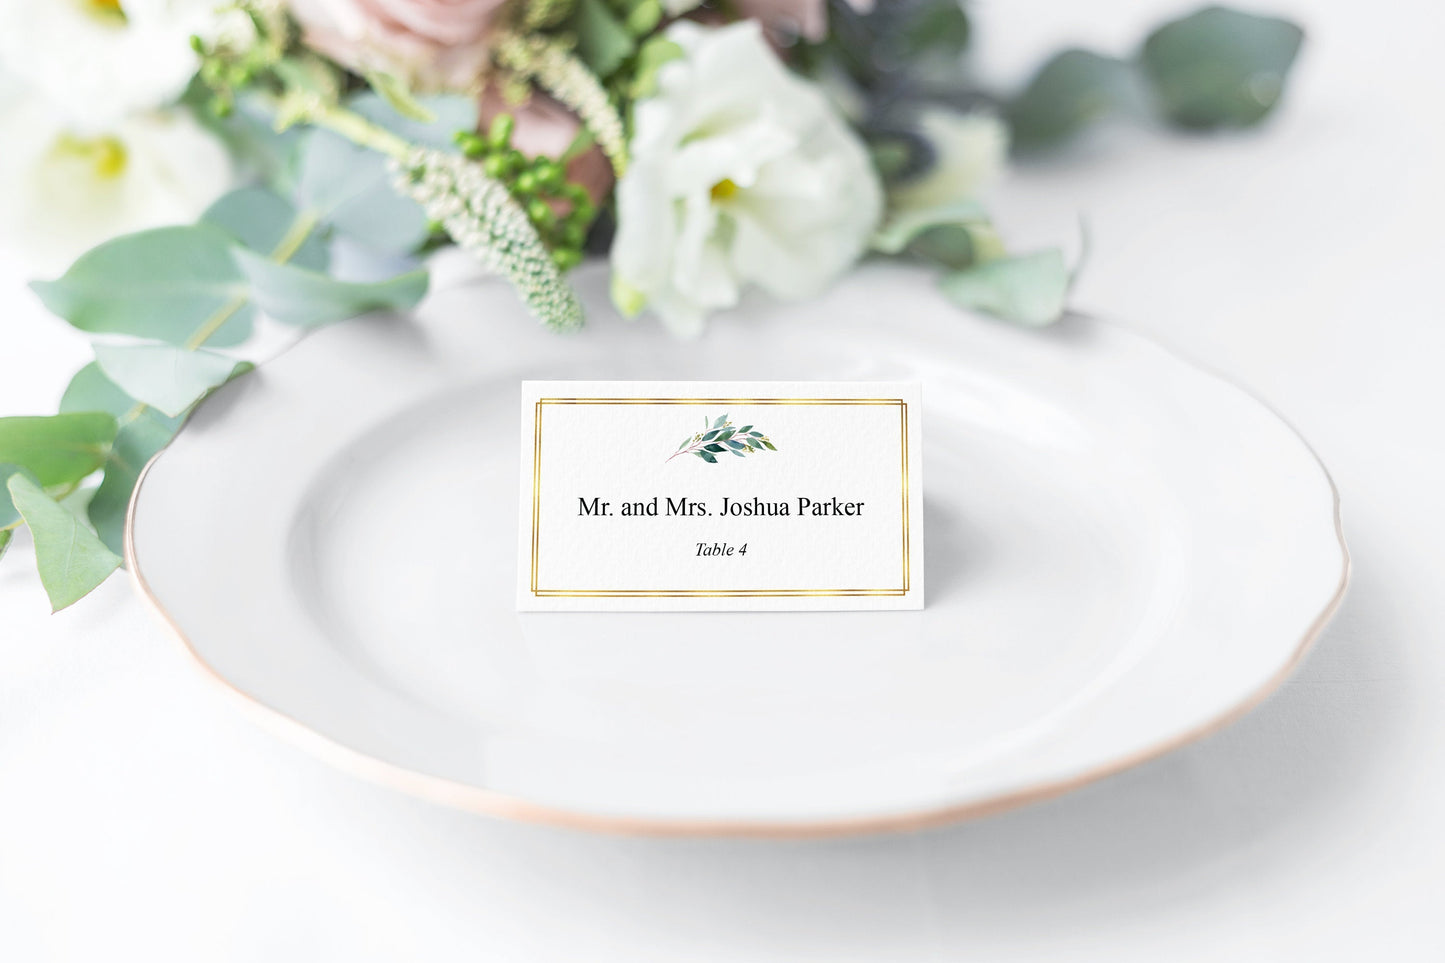 Wedding Place Card Template, Table Place Cards, Place Card Template, Tented Place Cards,Seating Cards, Name Cards, Gold, Greenery - Tara PLACE CARDS SAVVY PAPER CO